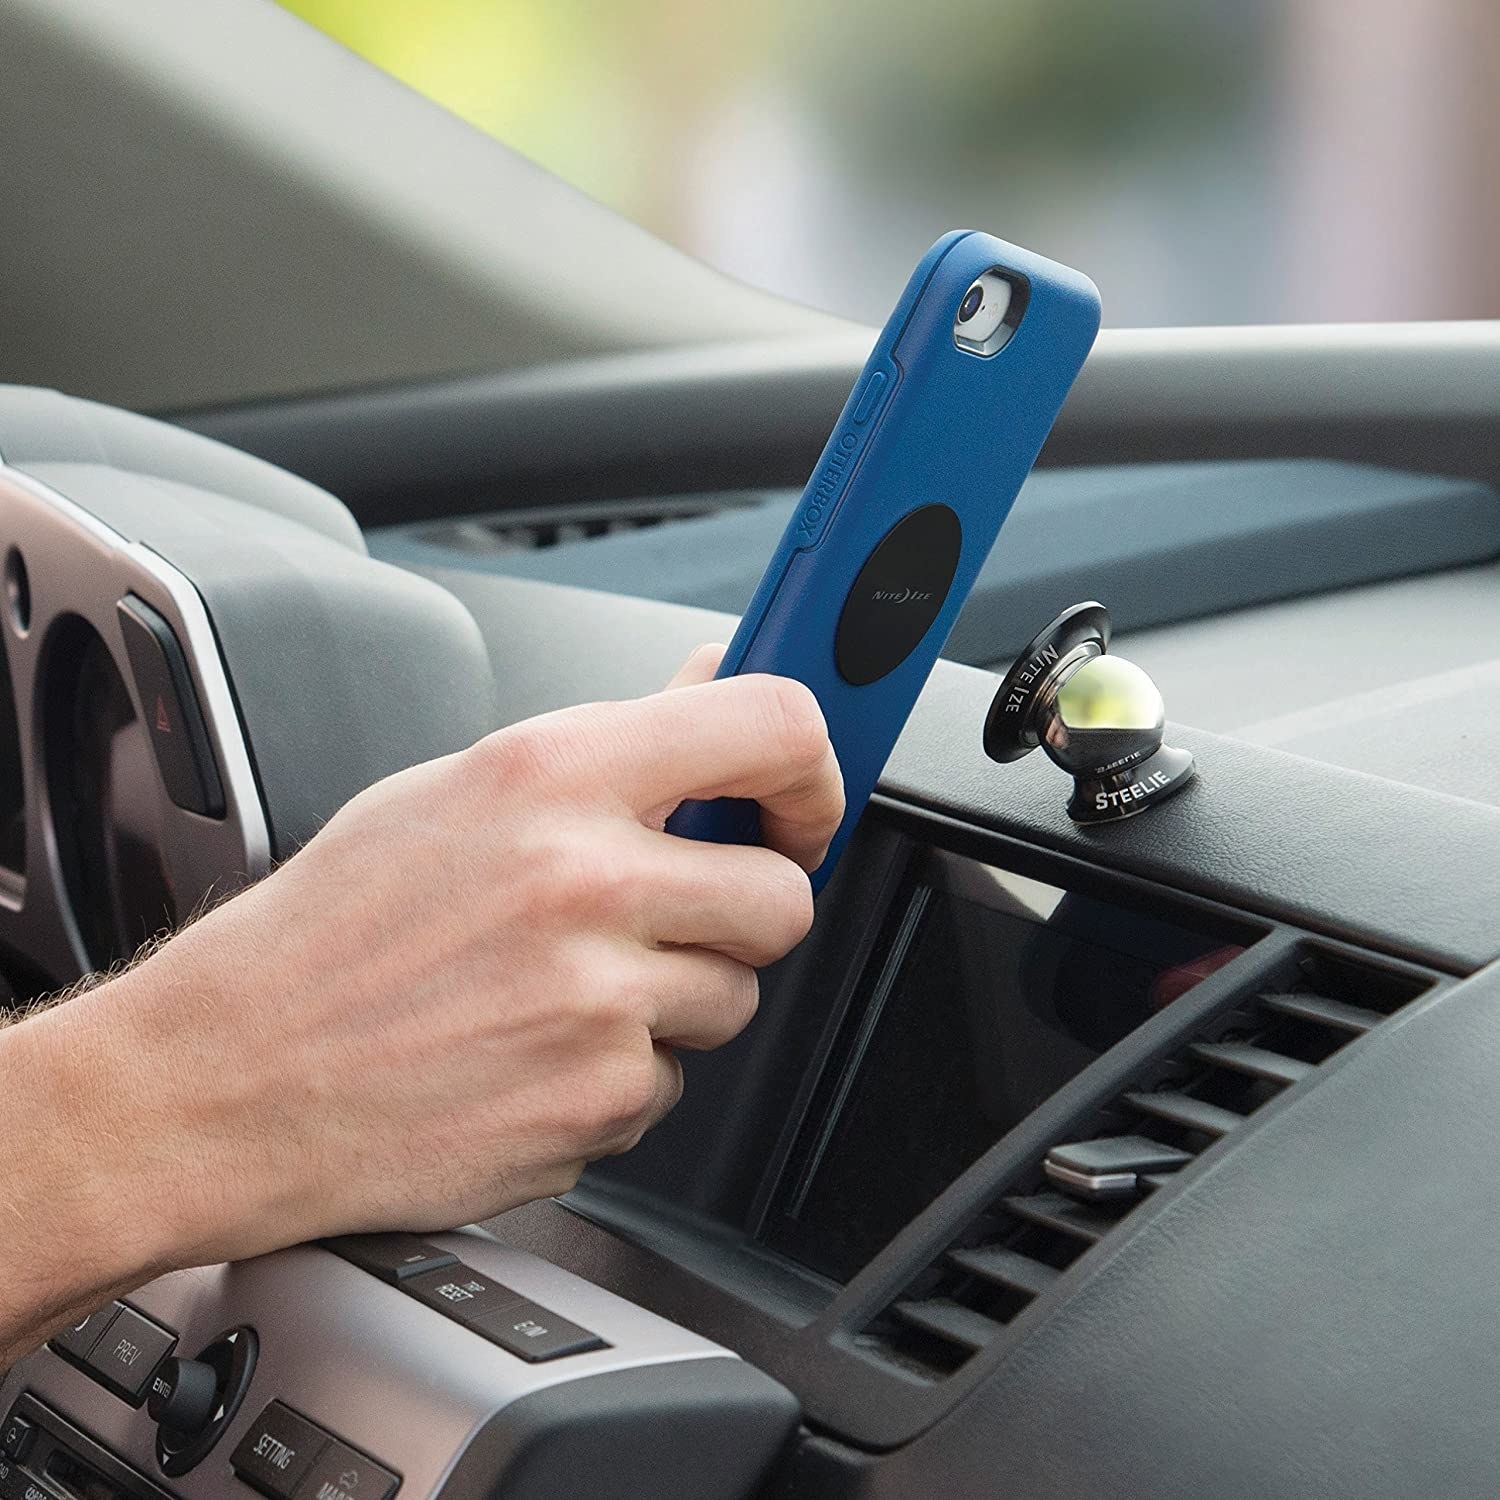 A person attaching their phone to a swiveling phone mount on their dashboard